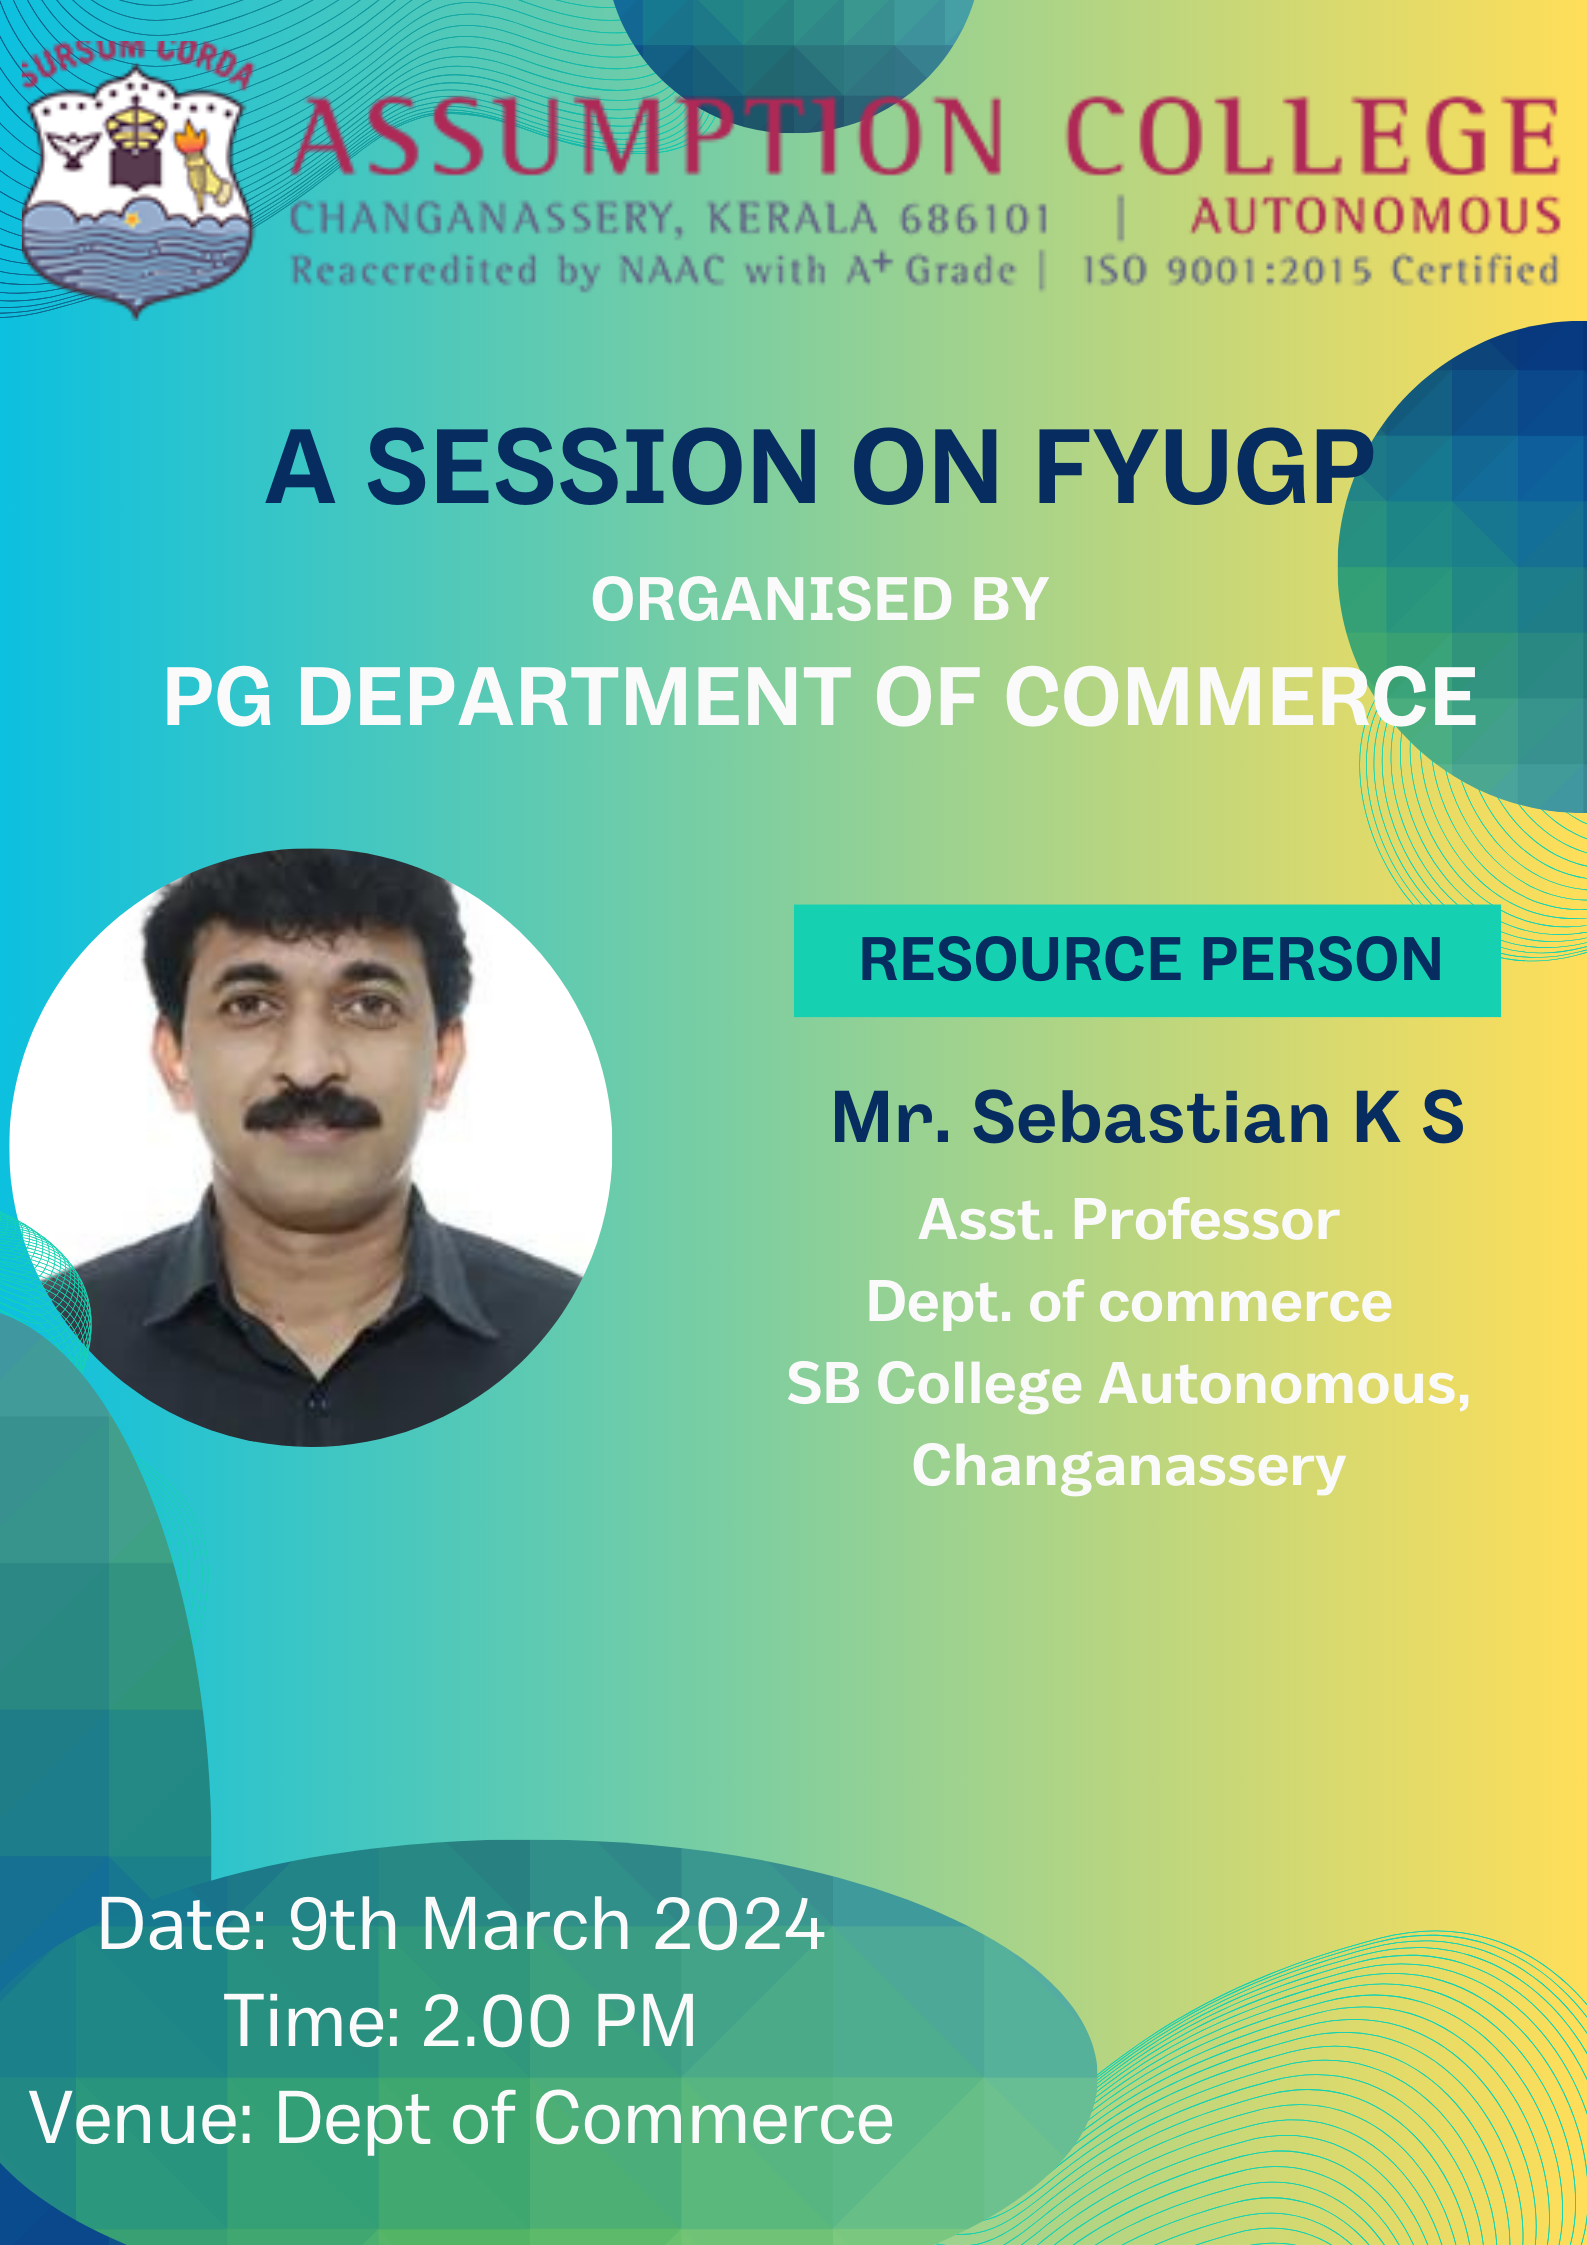 A Session on FYUGP